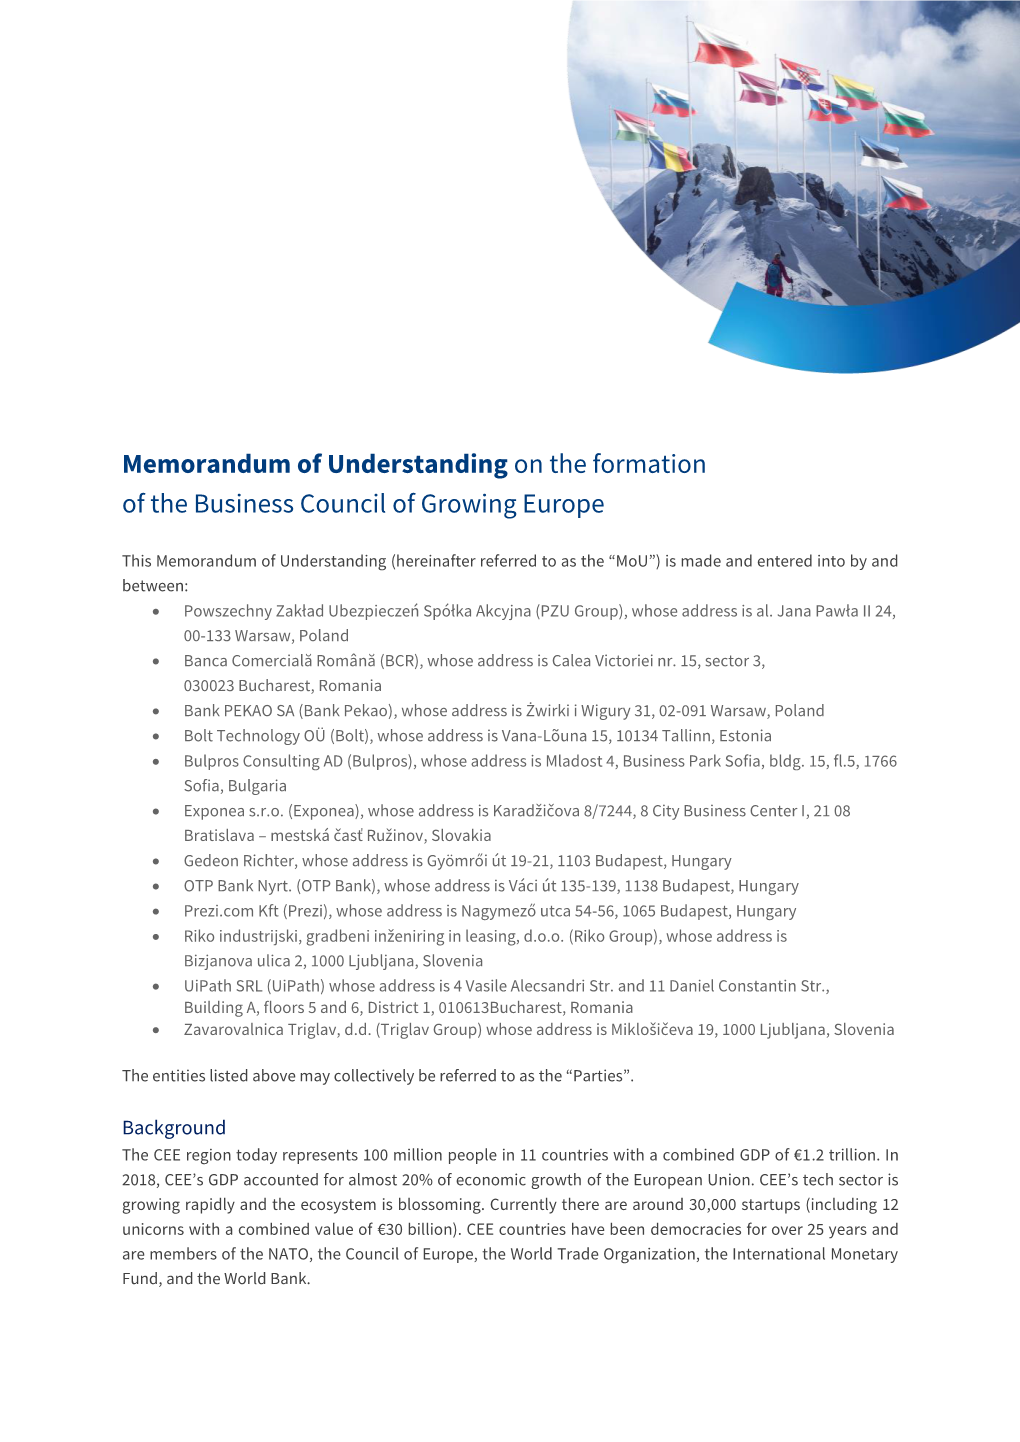 Memorandum of Understanding on the Formation of the Business Council of Growing Europe